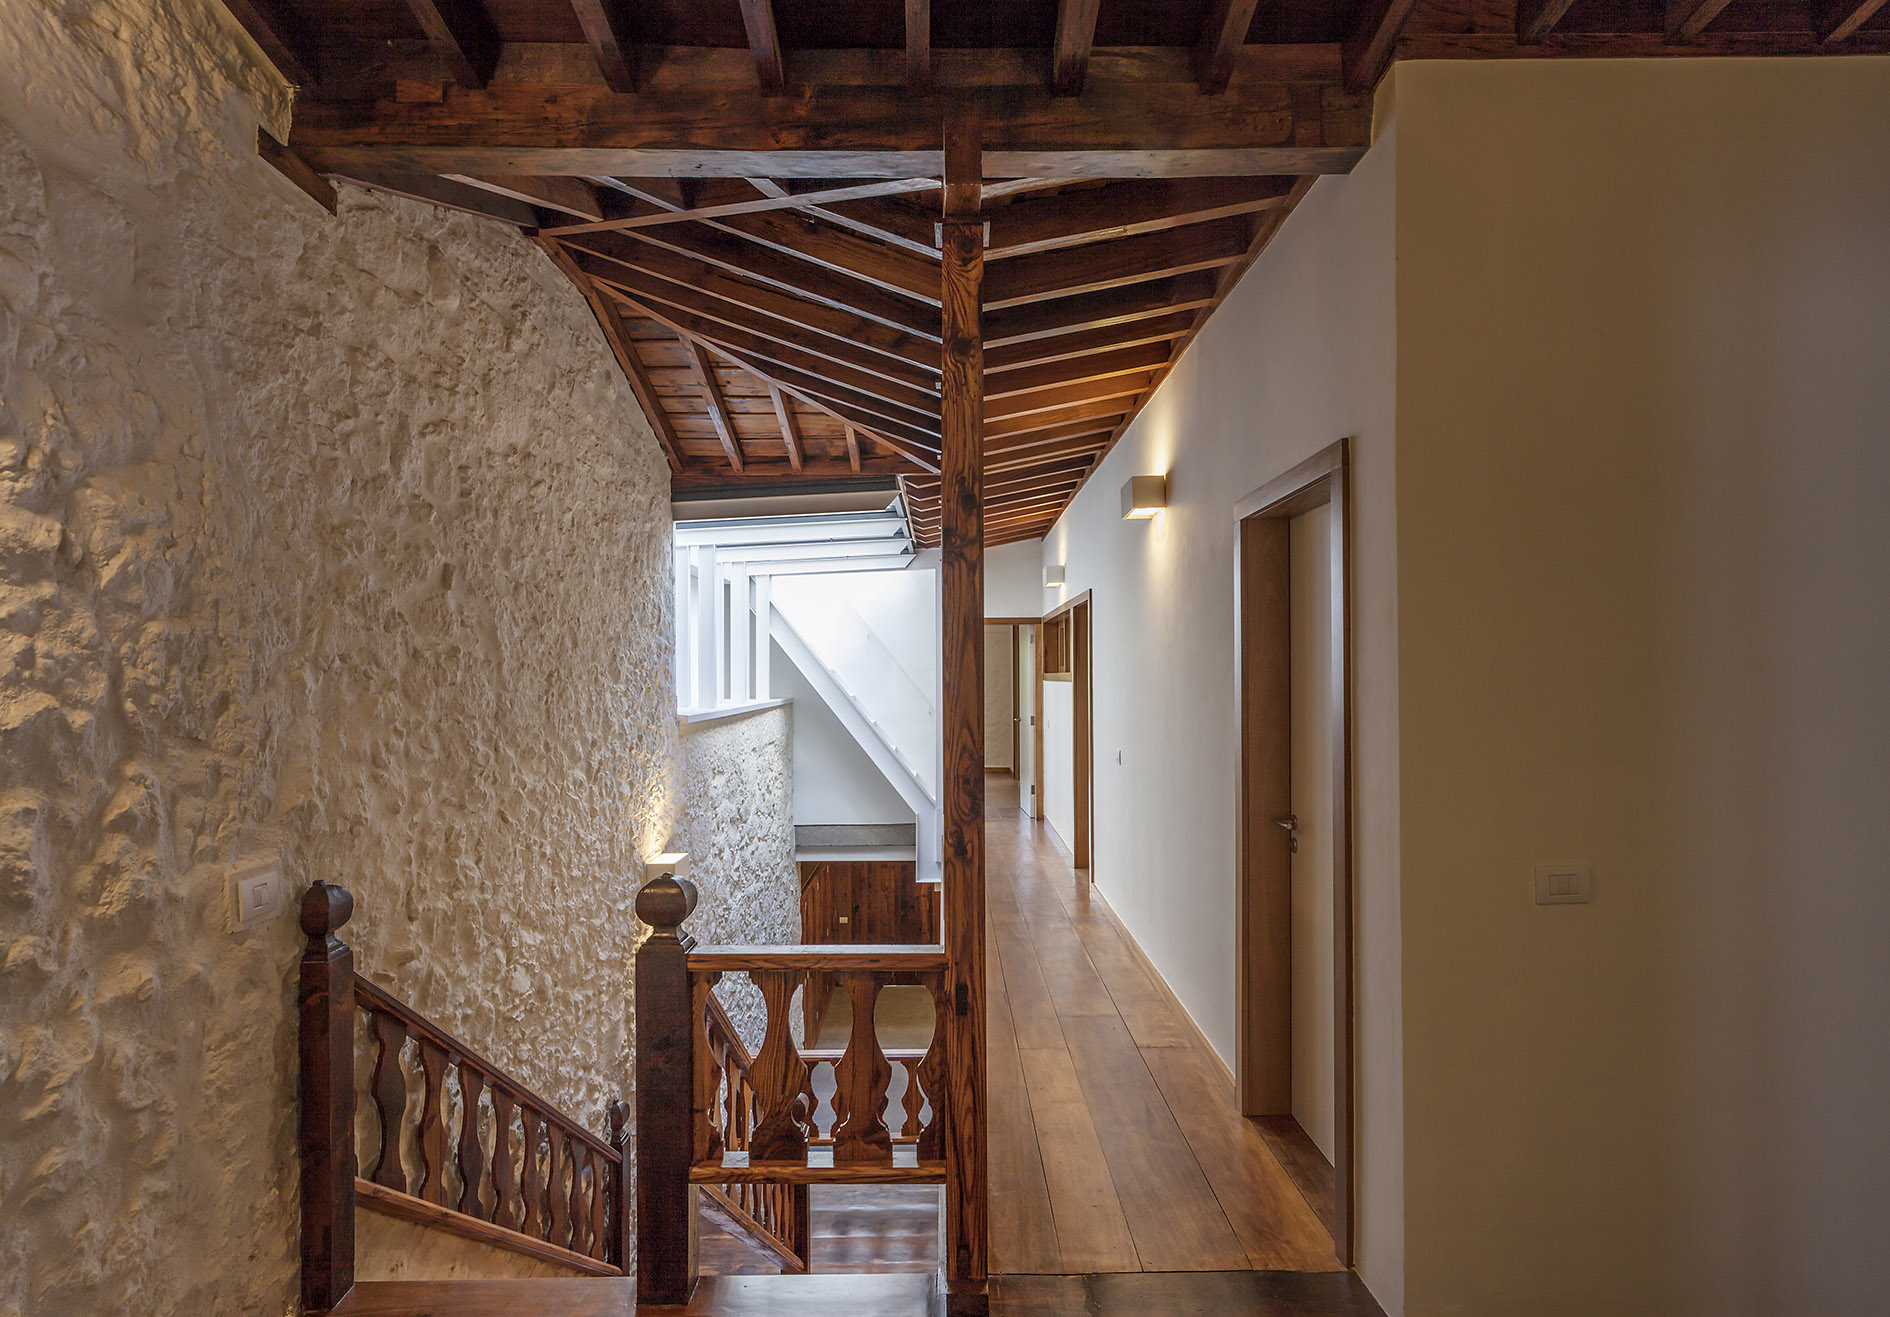 The house Tabares de Cala reclaims its function after decades of neglect